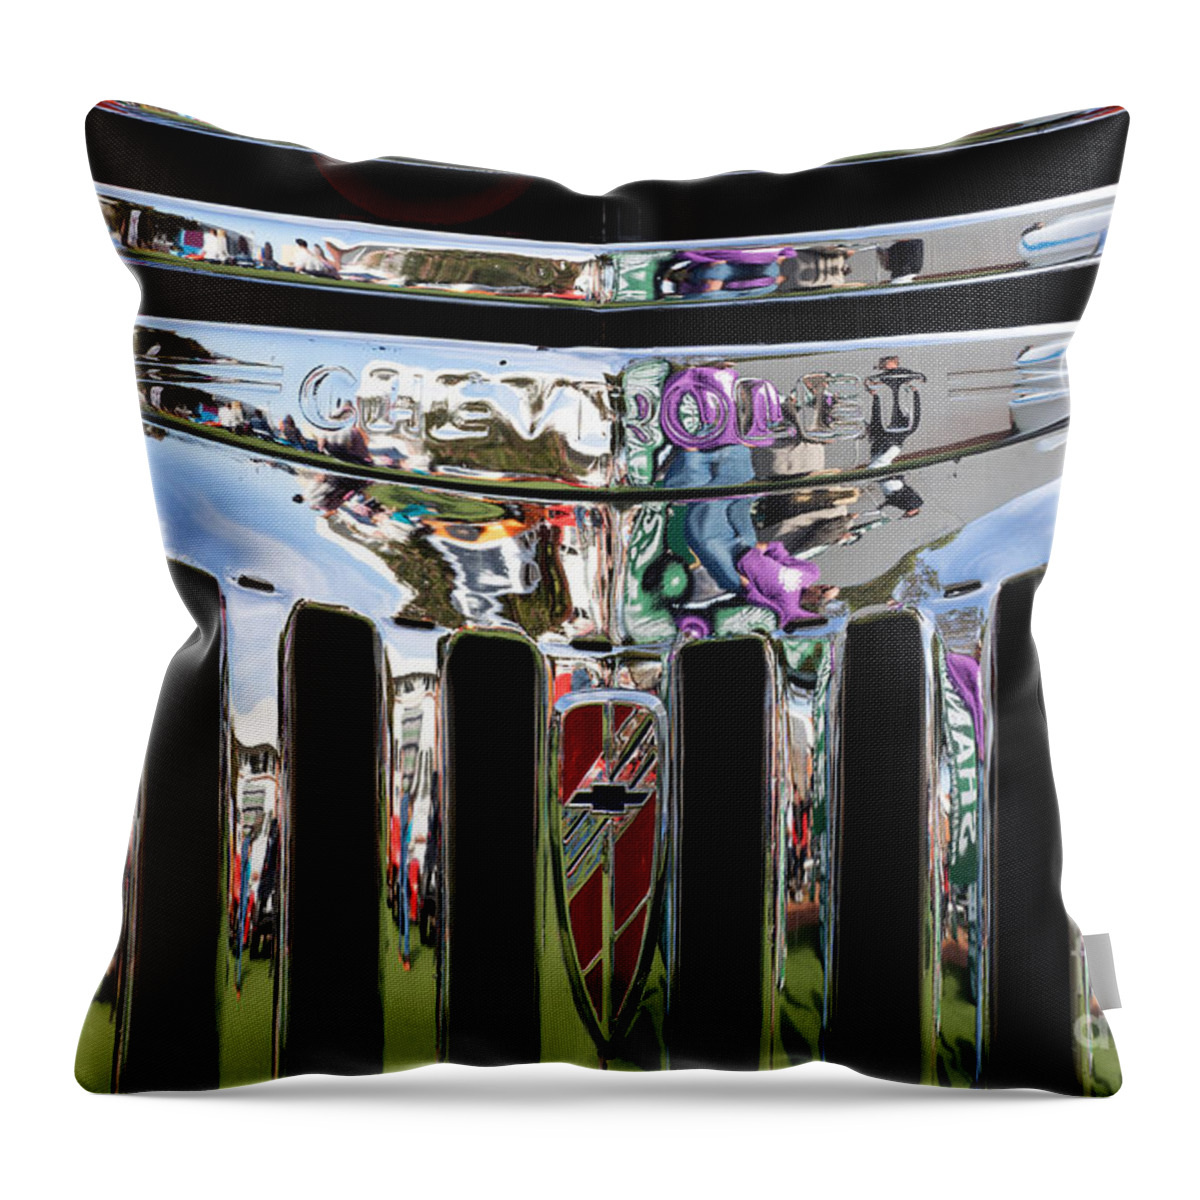 Chrome Throw Pillow featuring the photograph Chevrolet Grille 02 by Rick Piper Photography